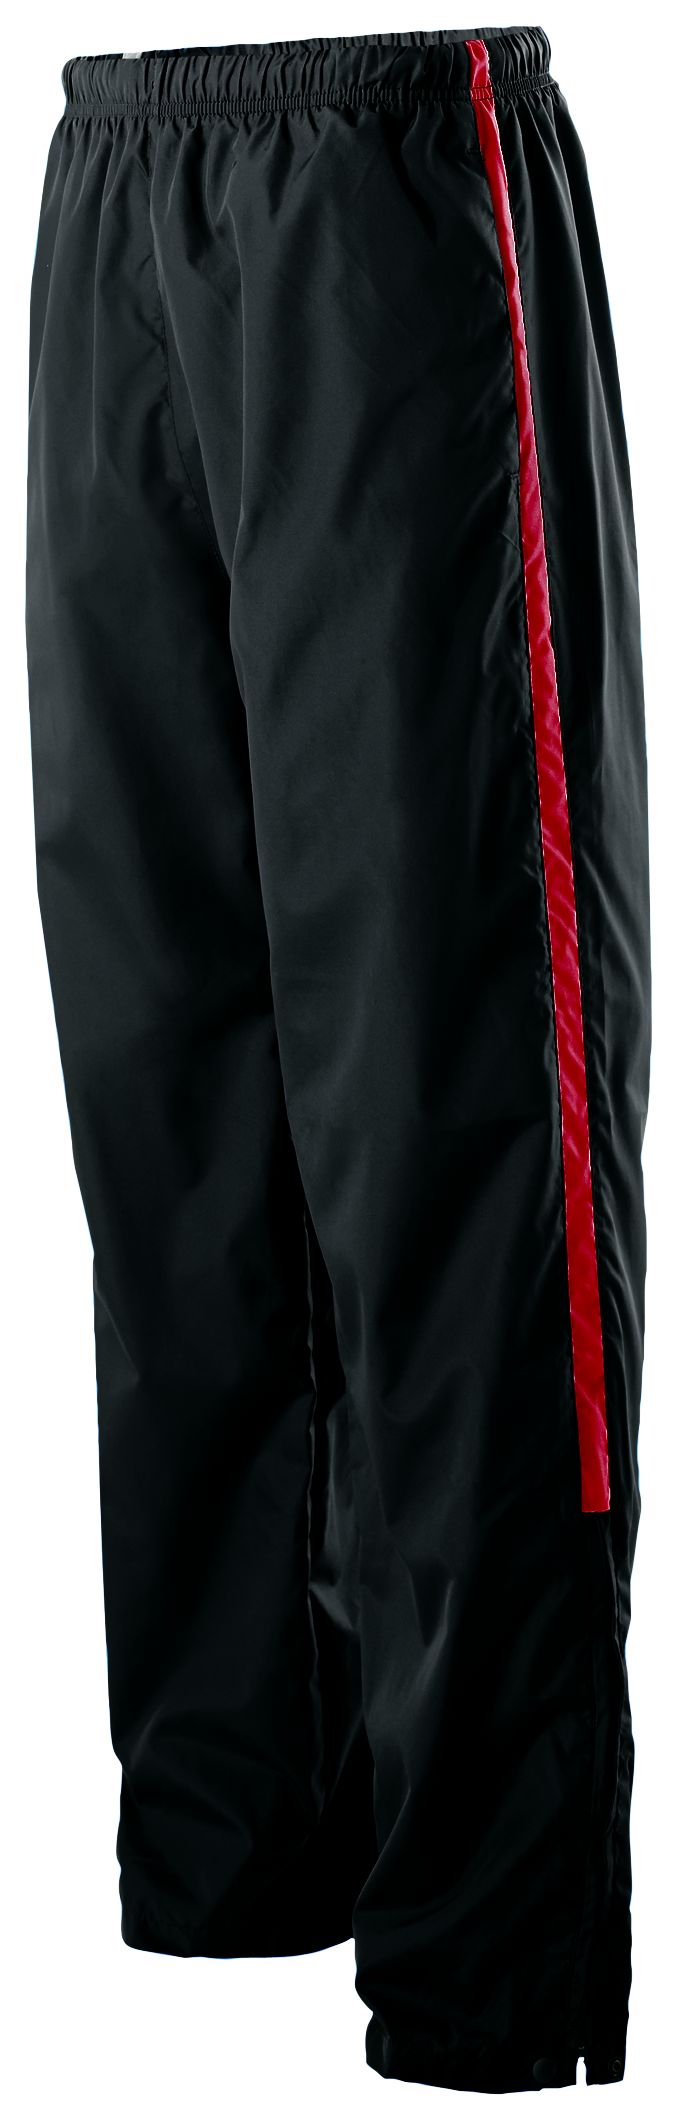 Holloway Sable Pant in Black/Scarlet  -Part of the Adult, Adult-Pants, Pants, Holloway product lines at KanaleyCreations.com